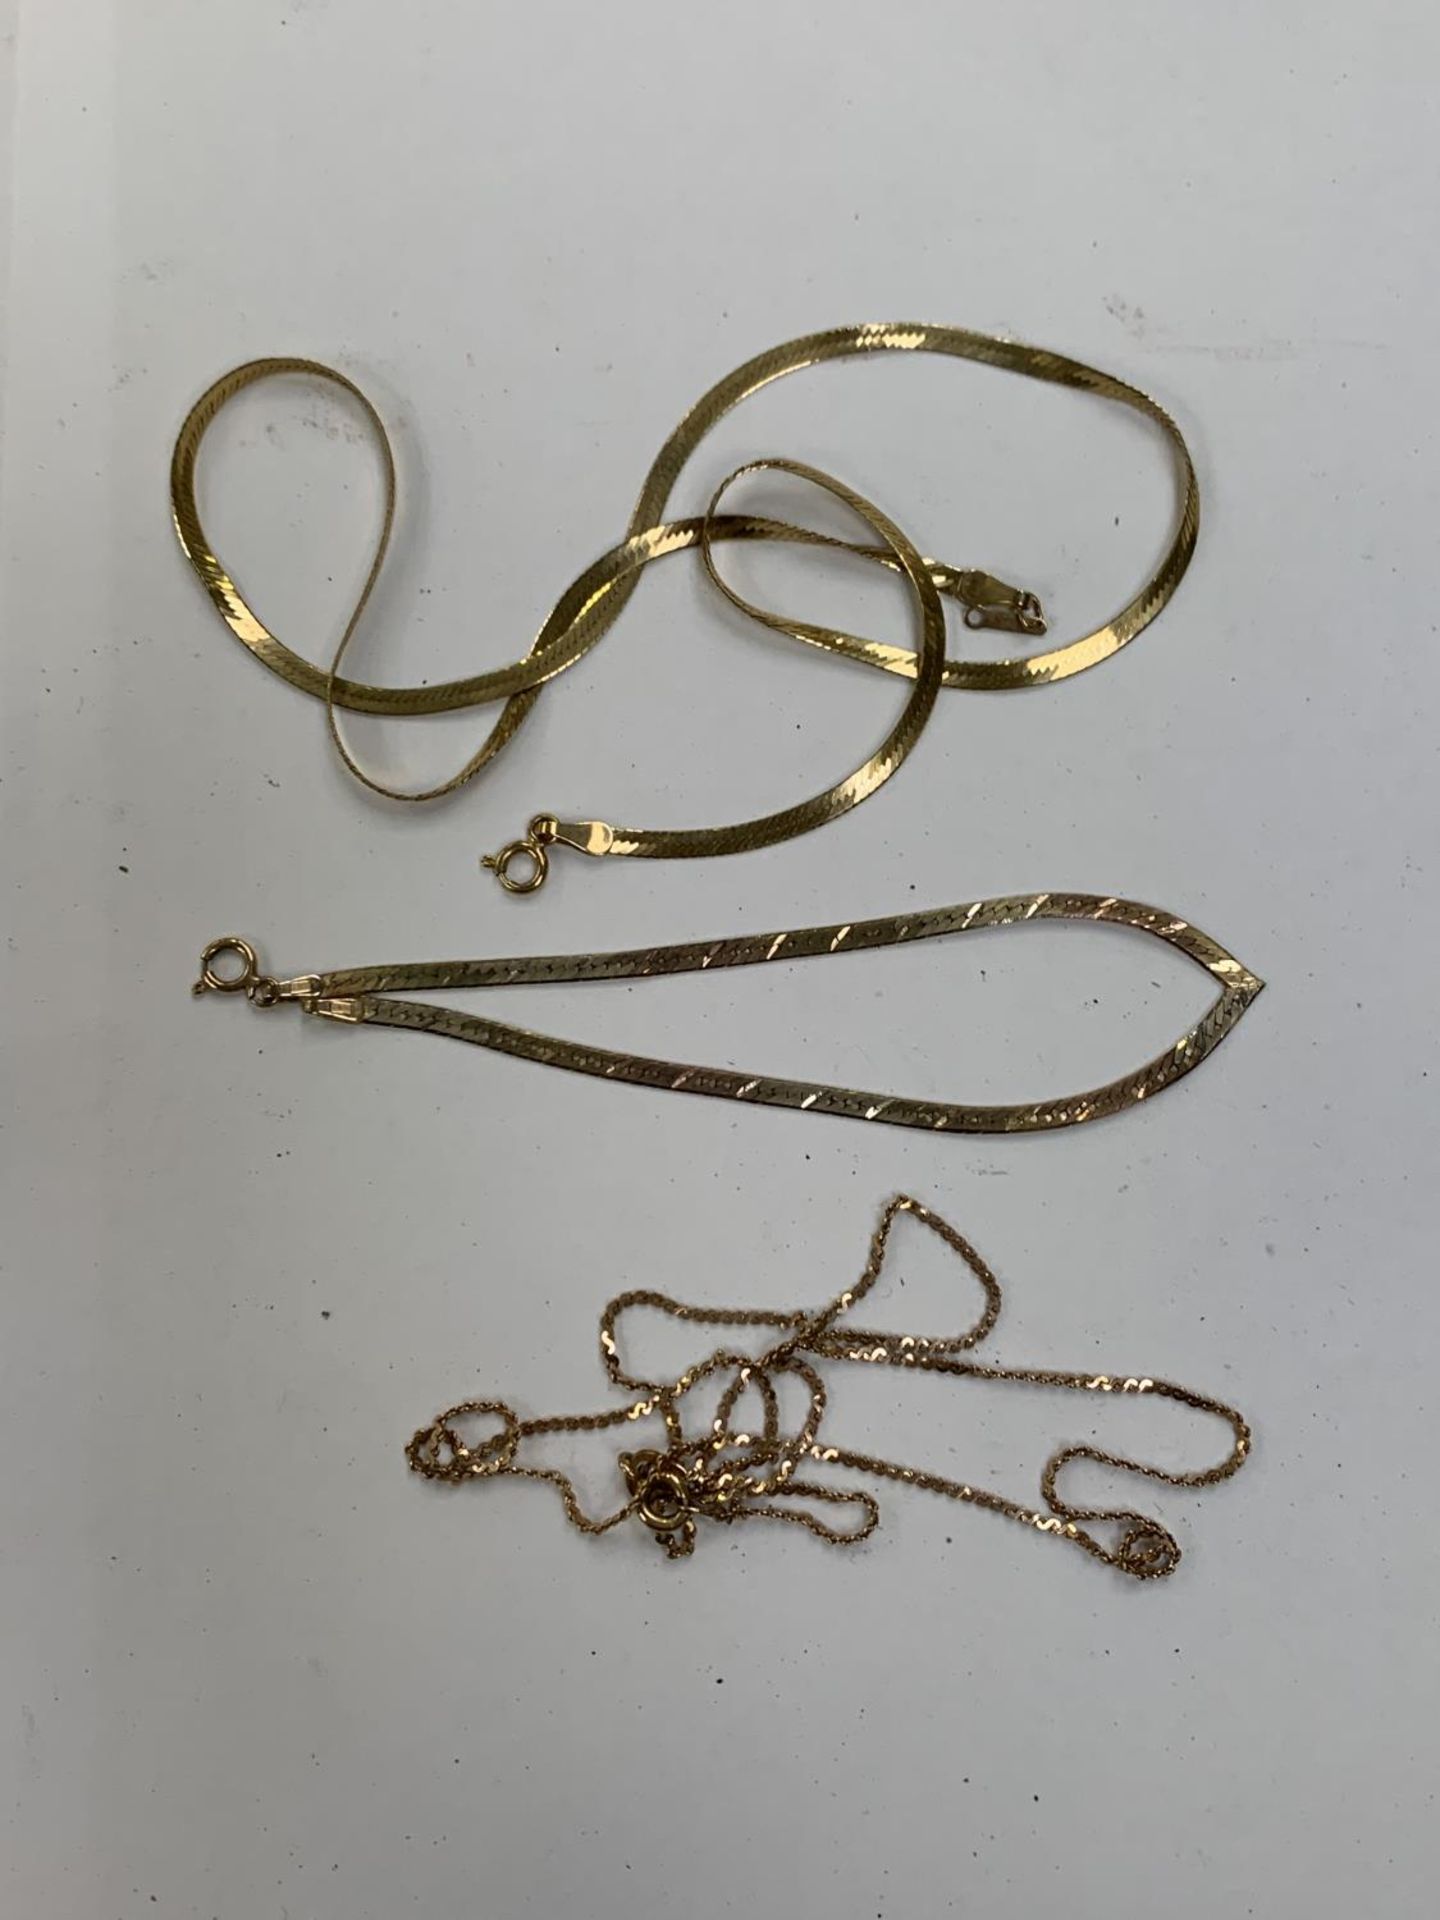 THREE 9CT YELLOW GOLD ITEMS - TWO NECKLACES AND A BRACELET, TOTAL WEIGHT 6.4 GRAMS